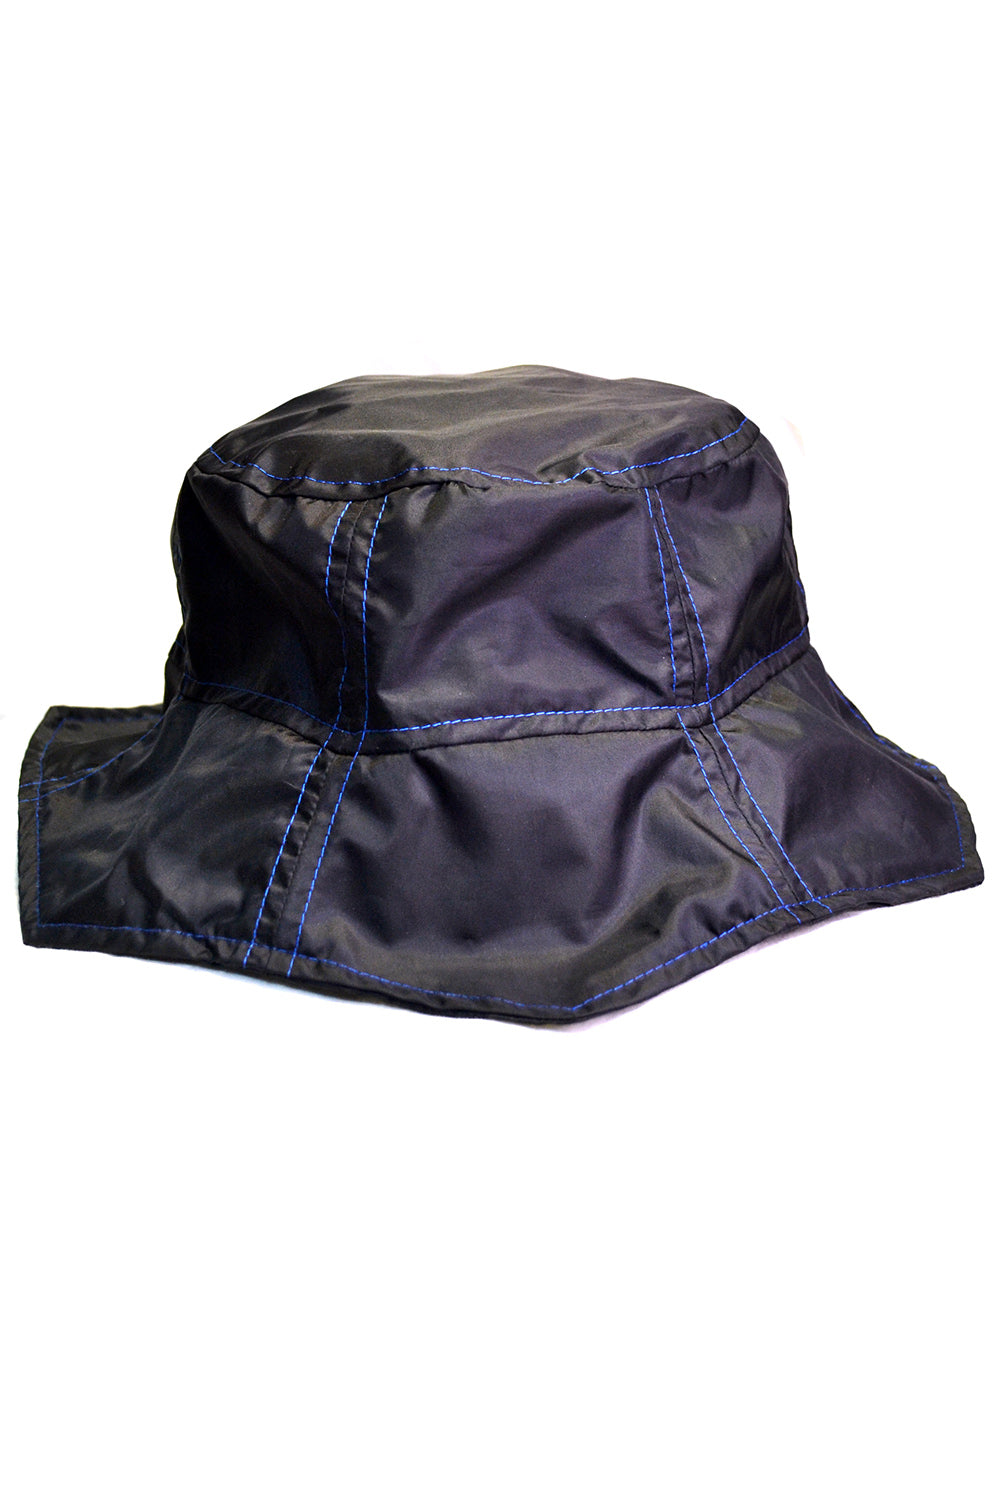 1800 Gallons LIMITED Upcycled Black Rain Hexy Hat